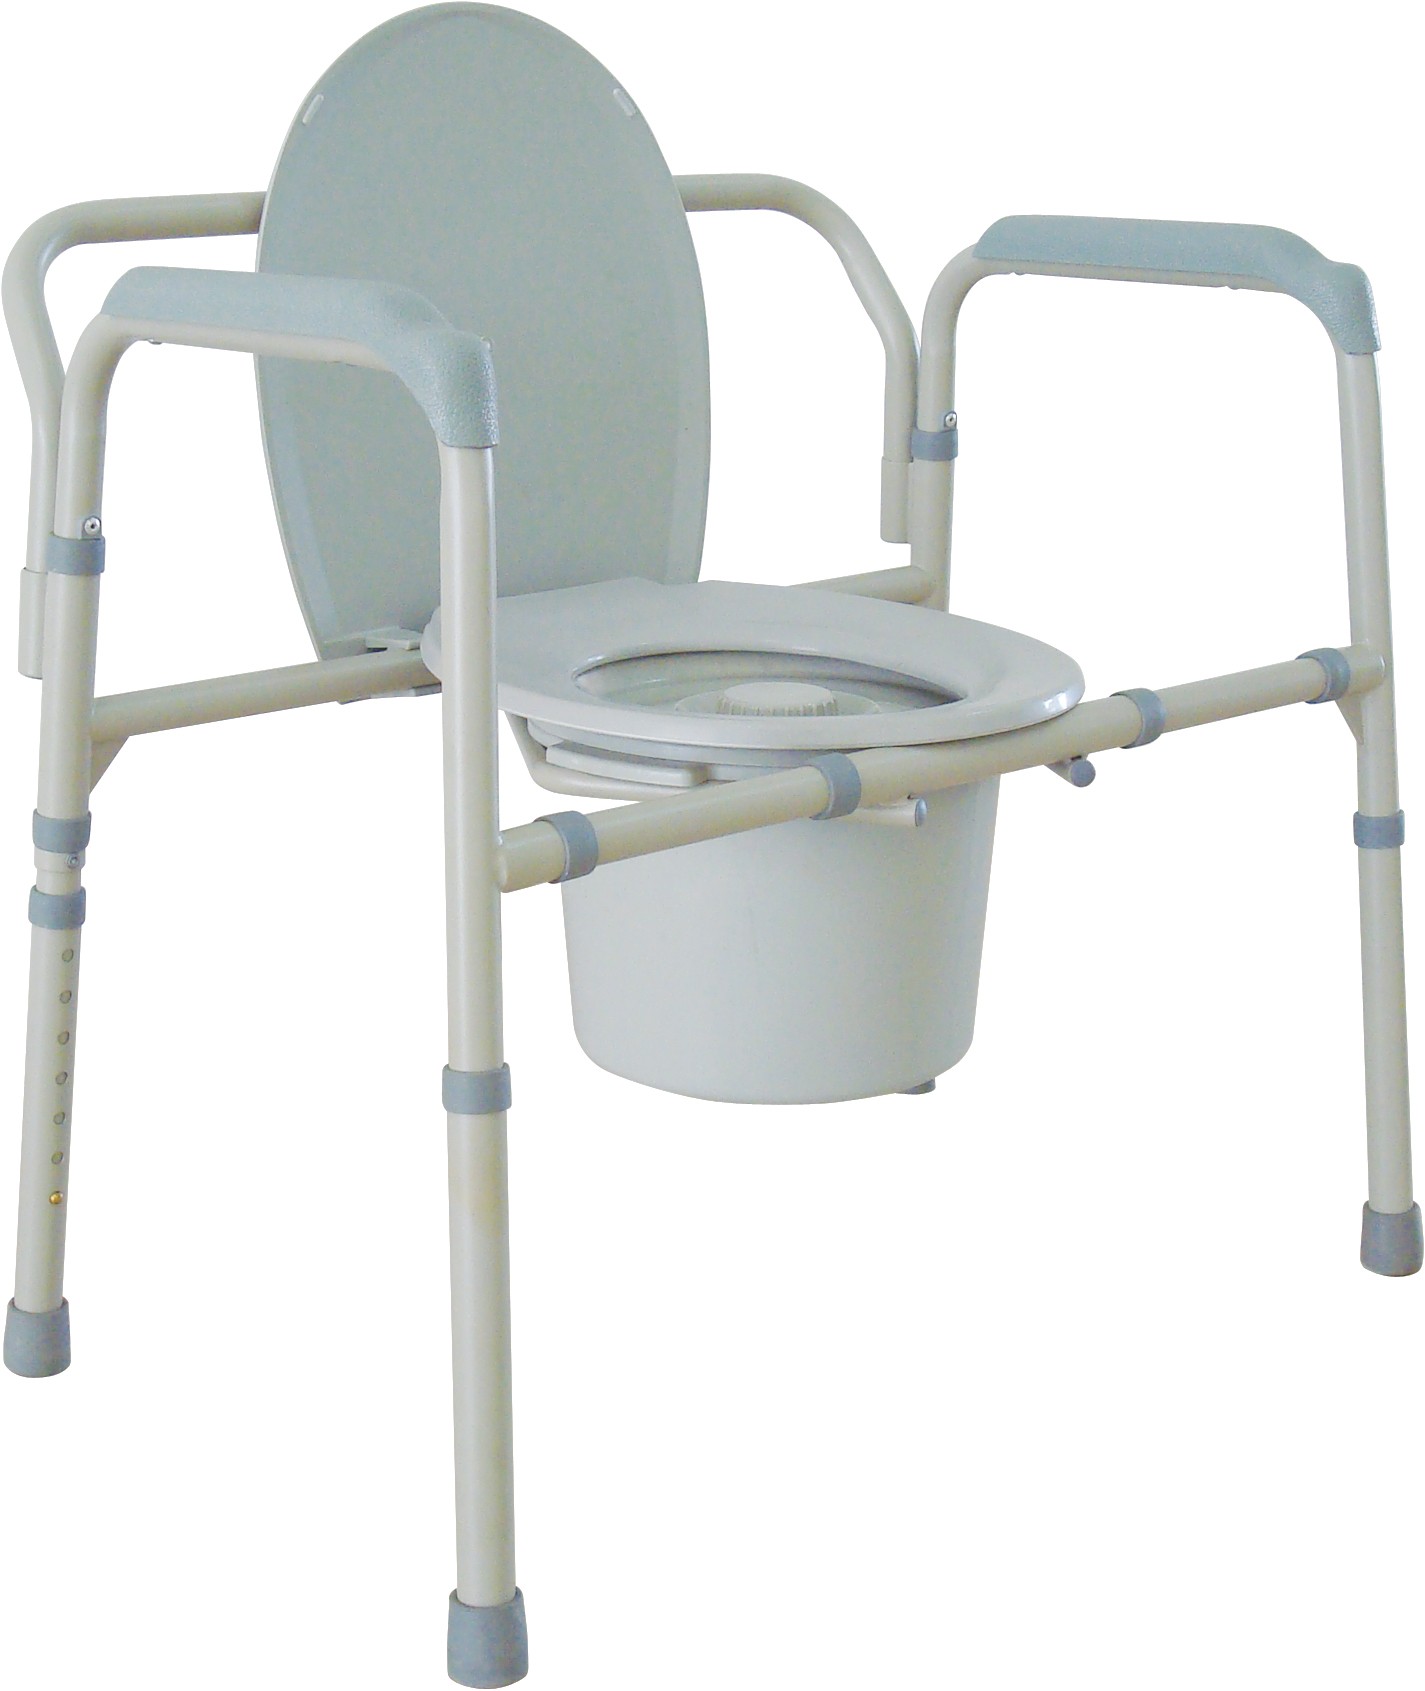 N - 8583 HEAVY DUTY DROP ARM COMMODE 500LB WEIGHT CAPACITY – HNH